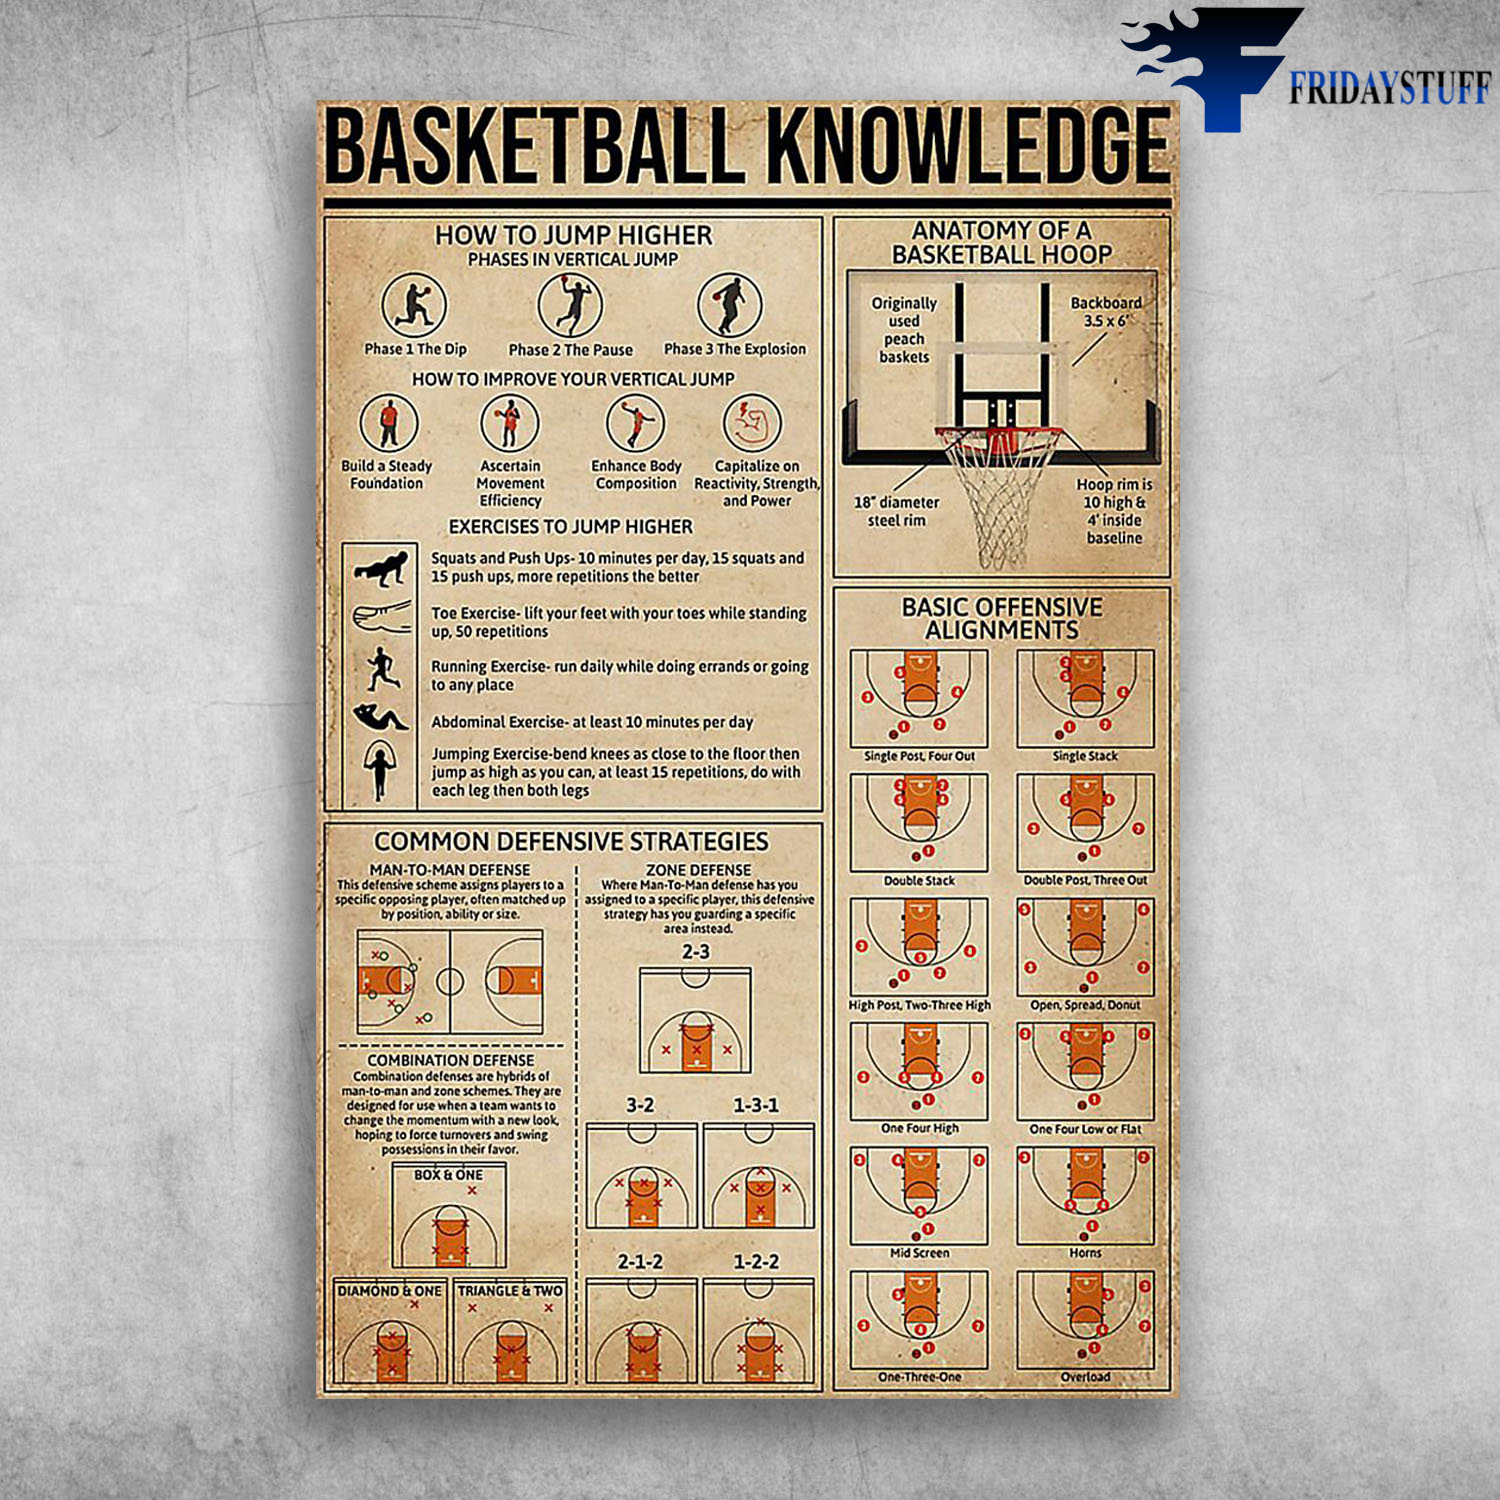 Basketball Knowledge How To Jump Higher Anatomy Of A Basketball Hoop